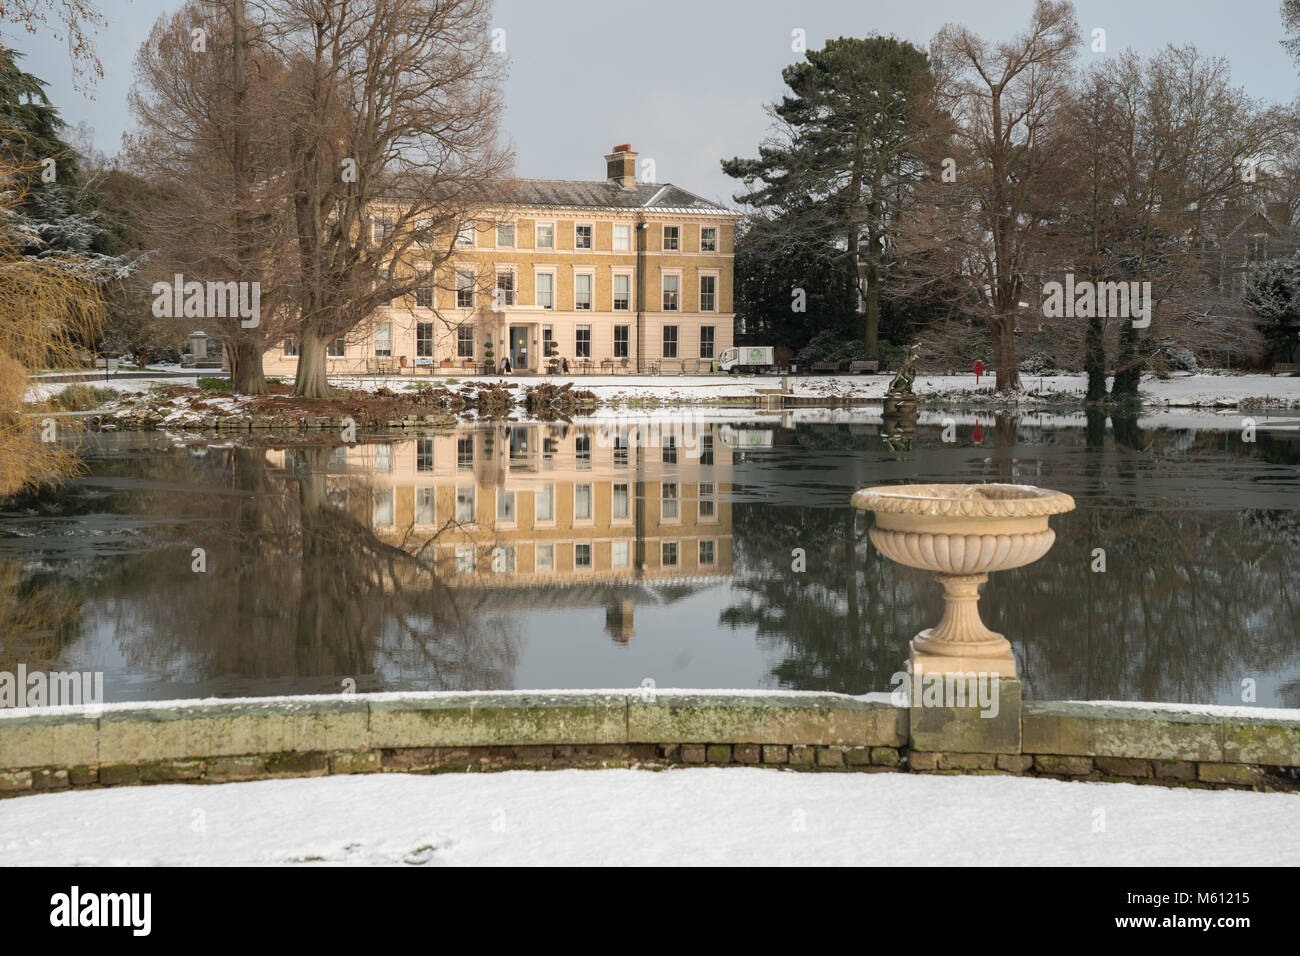 London, UK. 27th February, 2018. A view over the Palm House Pond to Museum No. 1 in Kew Gardens in London after the arrival of snow and the so-called Beast from the East cold snap. Photo date: Tuesday, February 27, 2018. Credit: Roger Garfield/Alamy Live News Stock Photo